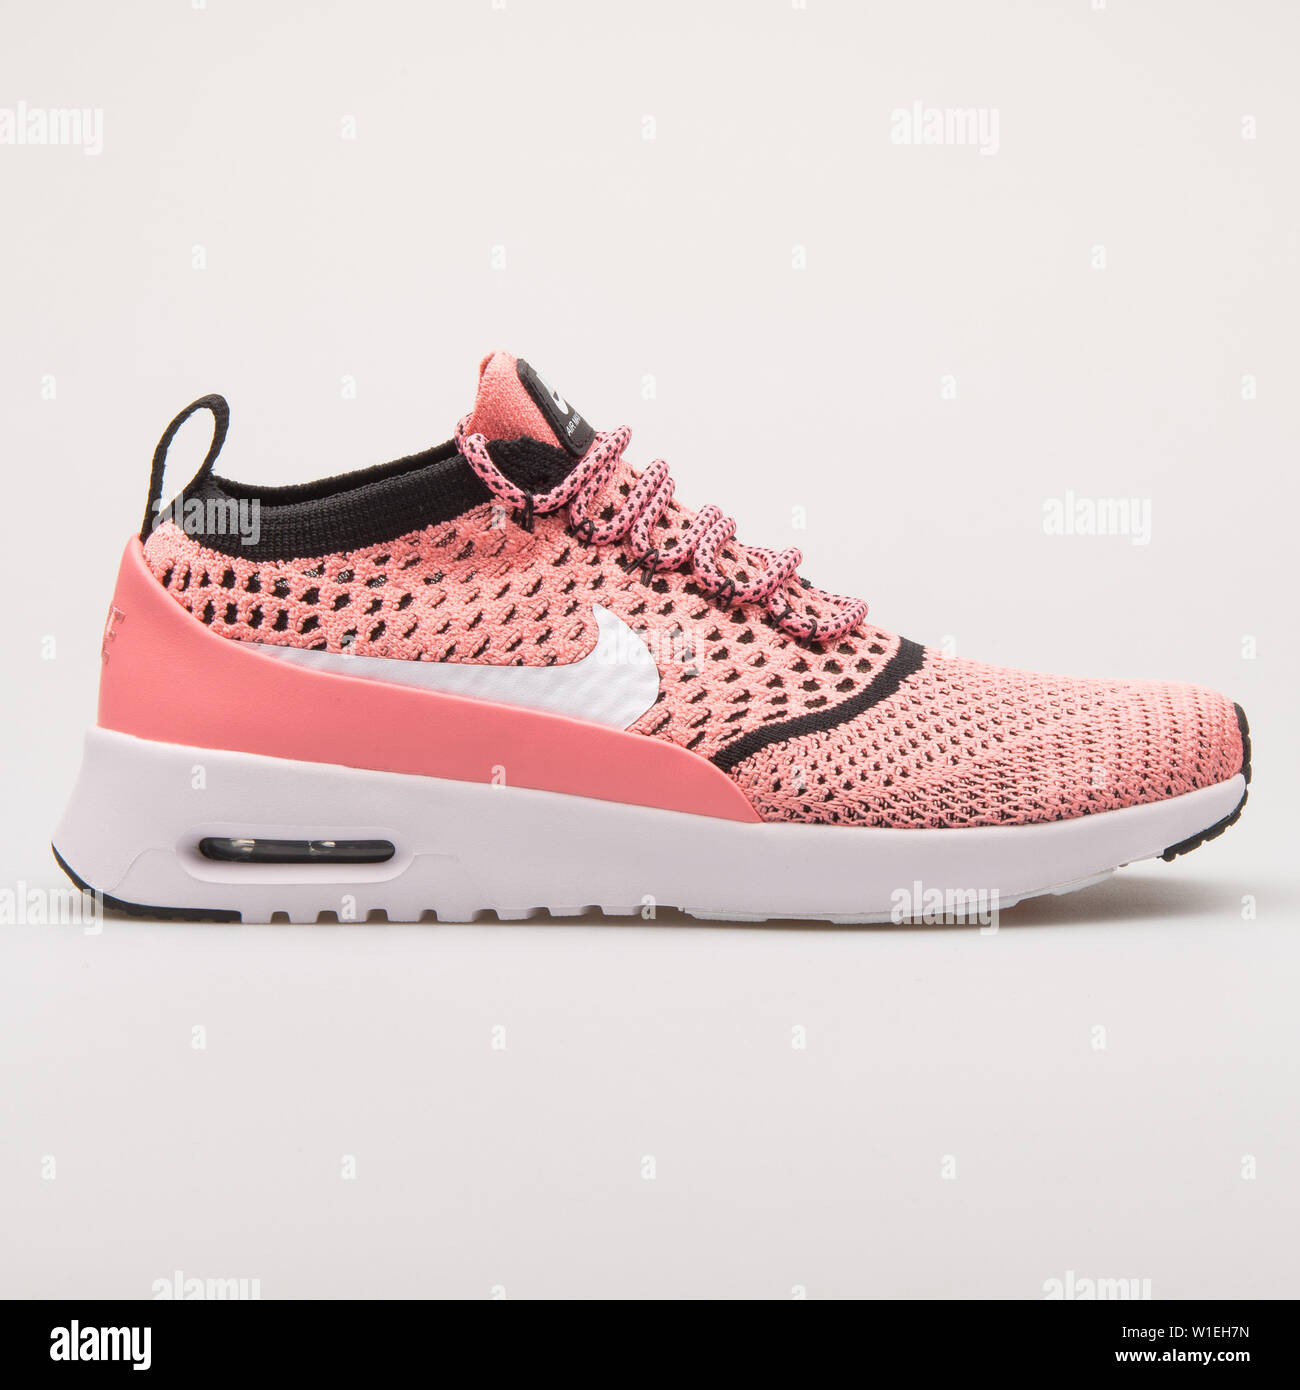 VIENNA, AUSTRIA - AUGUST 23, 2017: Nike Air Max Thea Ultra Flyknit pink  sneaker on white background Stock Photo - Alamy